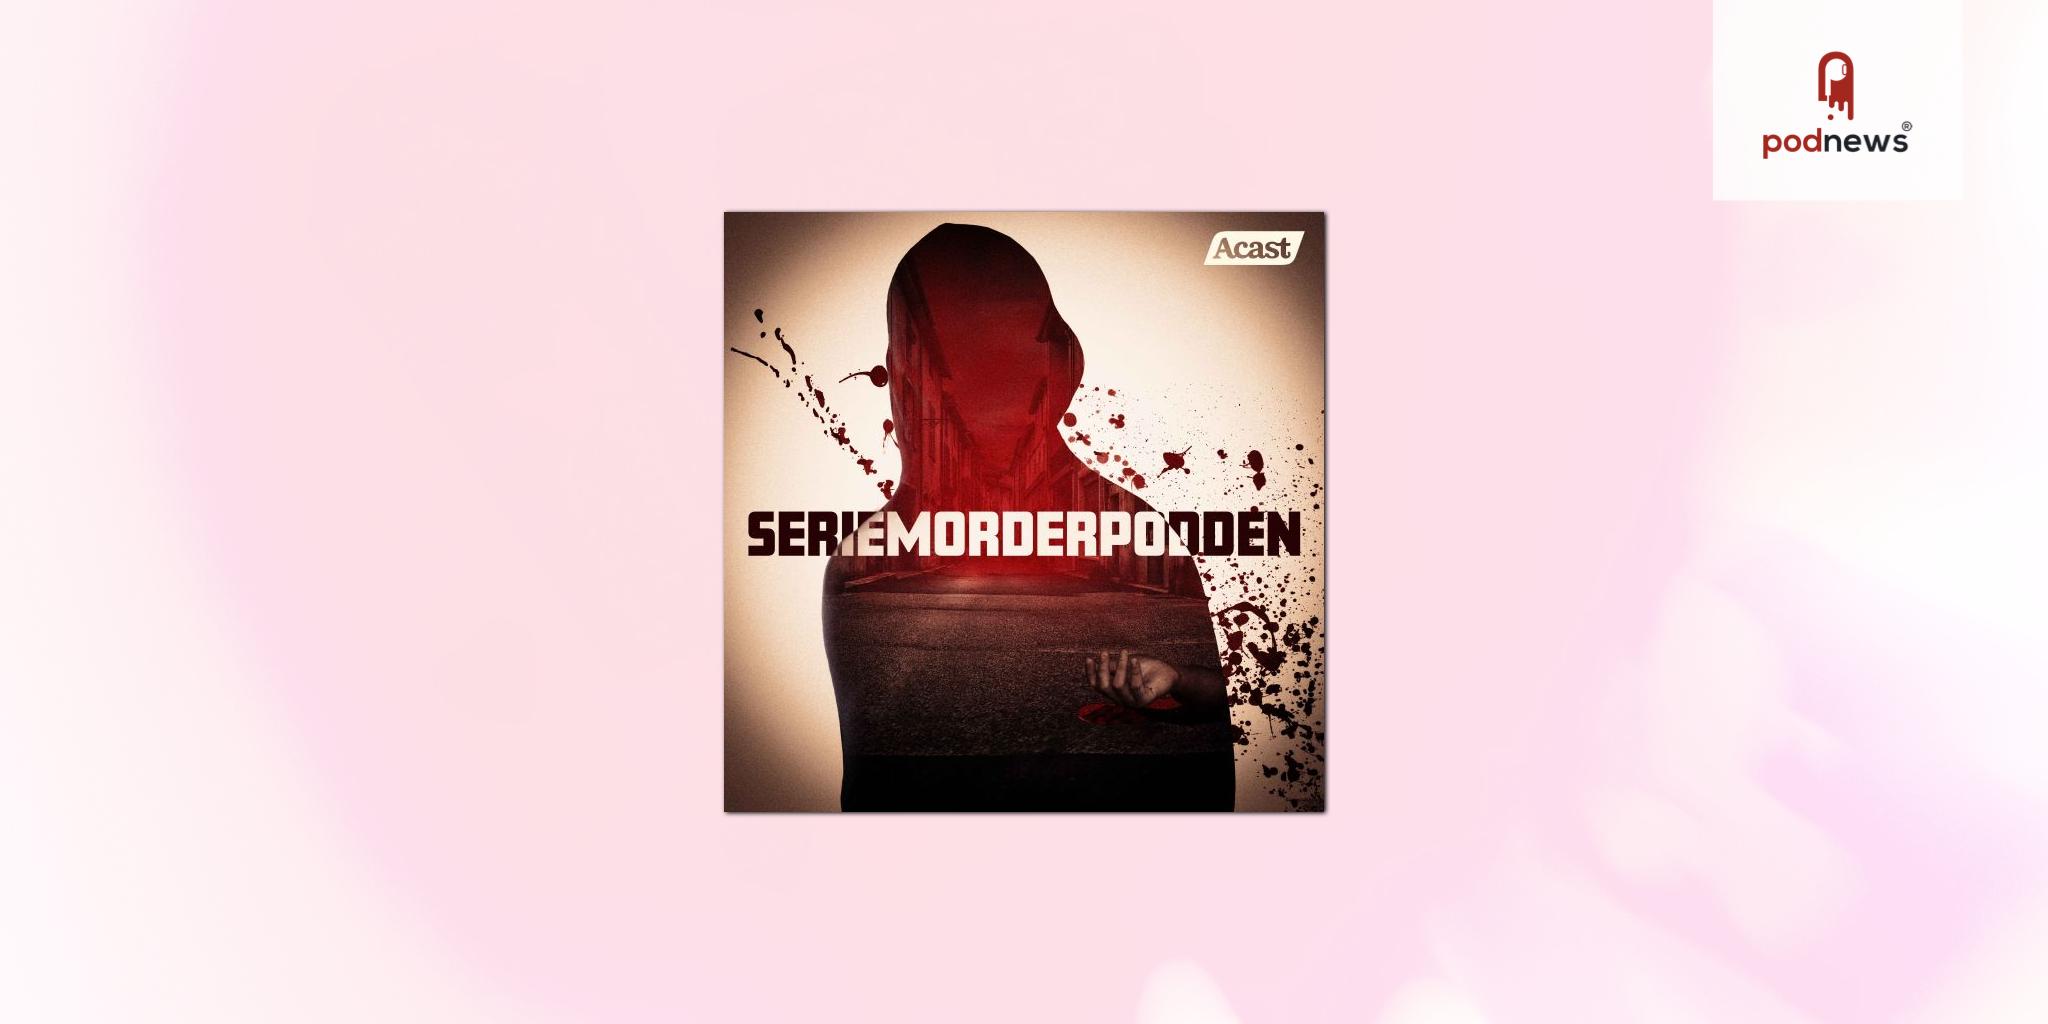 Acast launches Seriemorderpodden in Norway after big international success with The Serial Killer Podcast